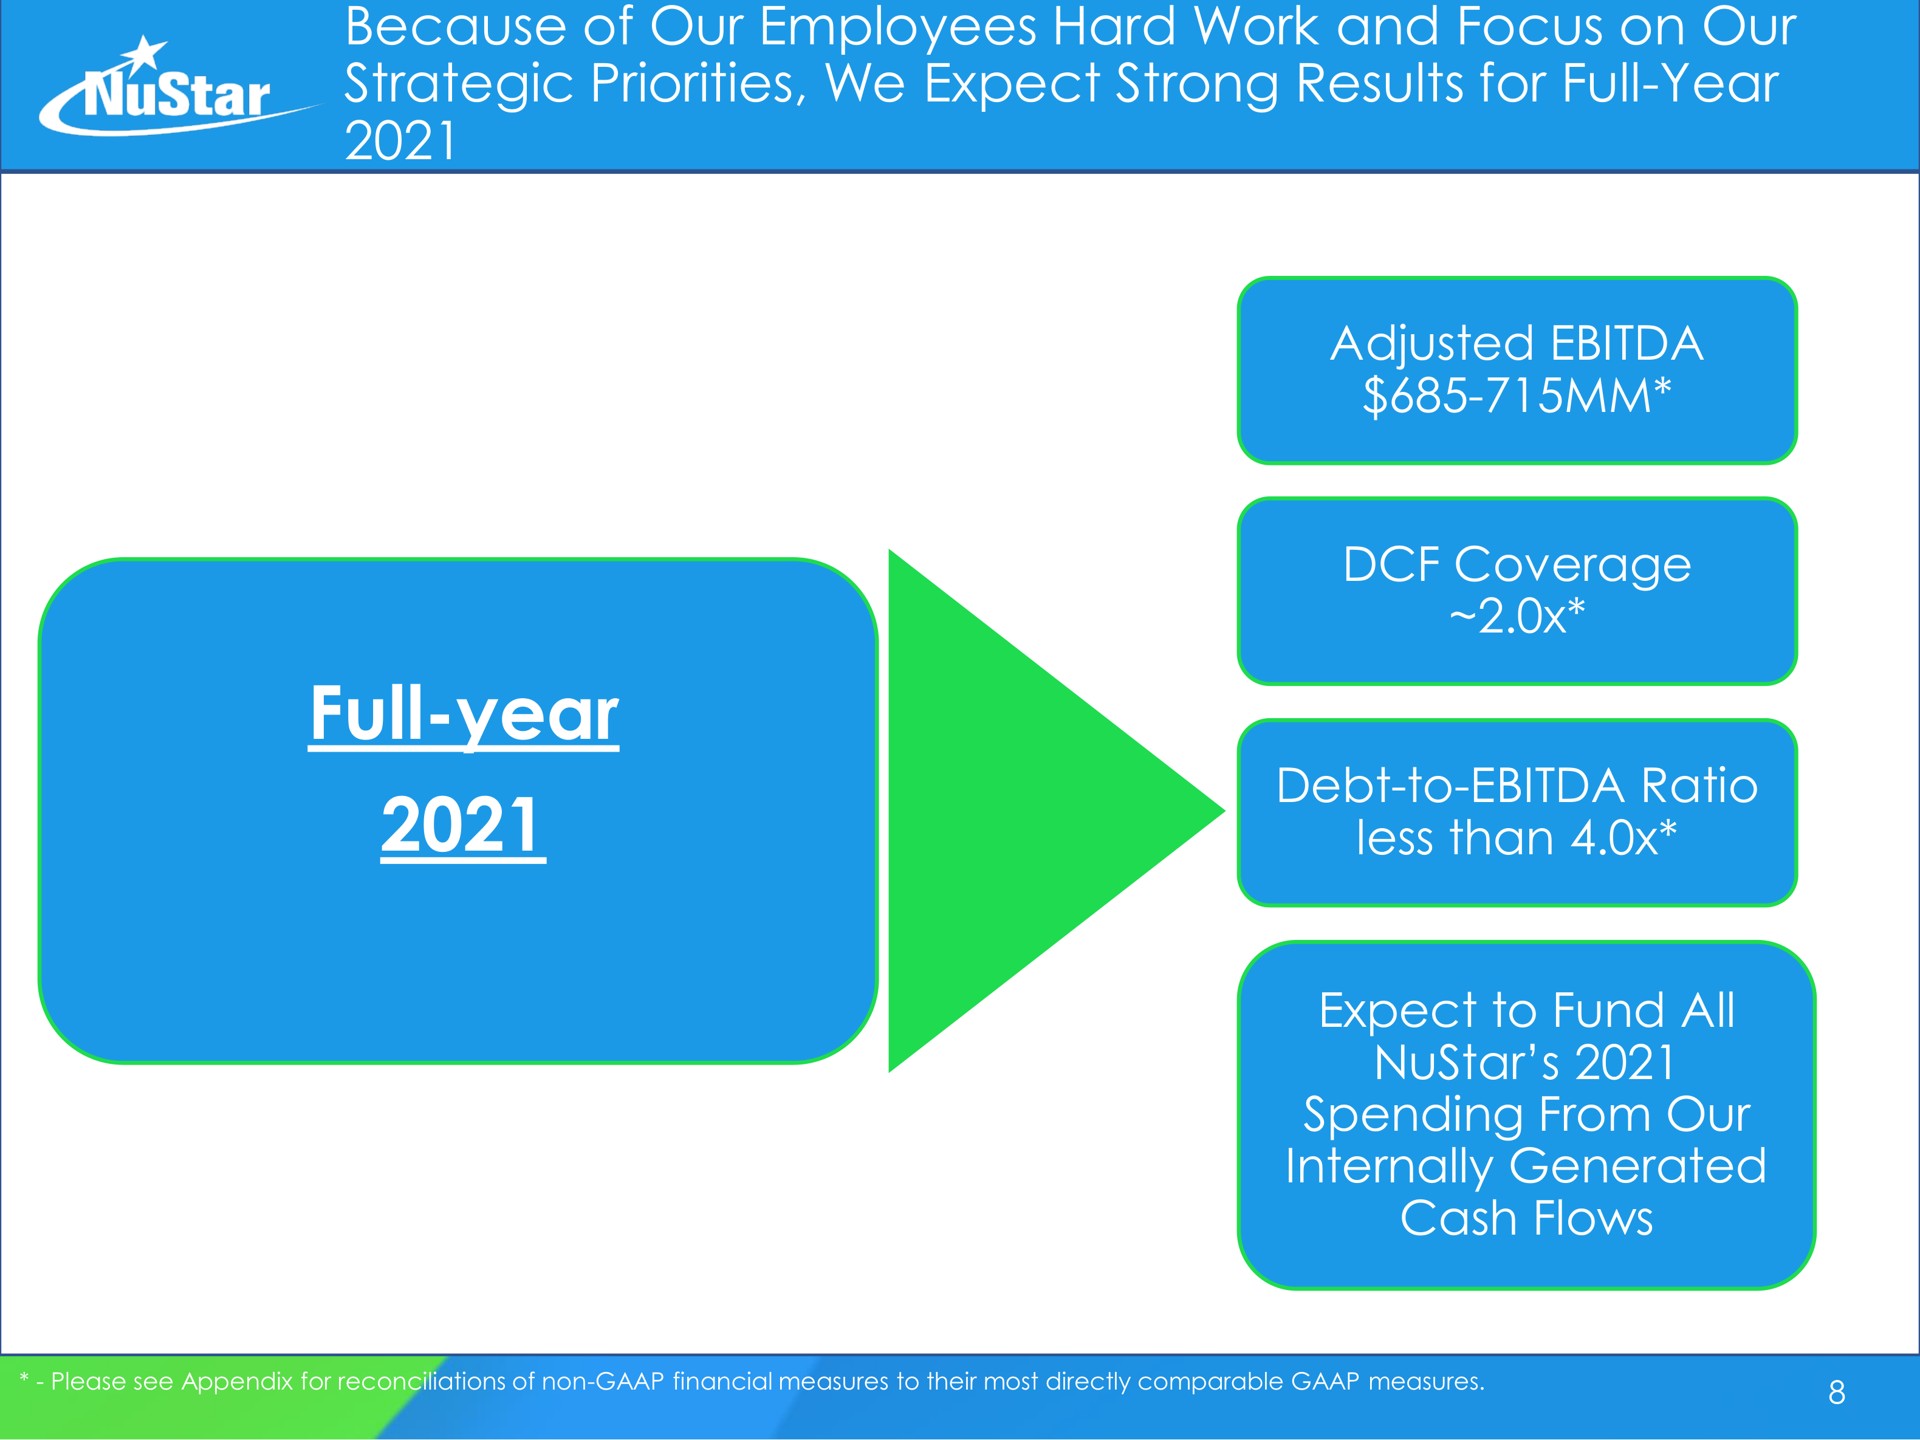 because of our employees hard work and focus on our strategic priorities we expect strong results for full year full year adjusted coverage debt to ratio less than expect to fund all spending from our internally generated cash flows rat star | NuStar Energy